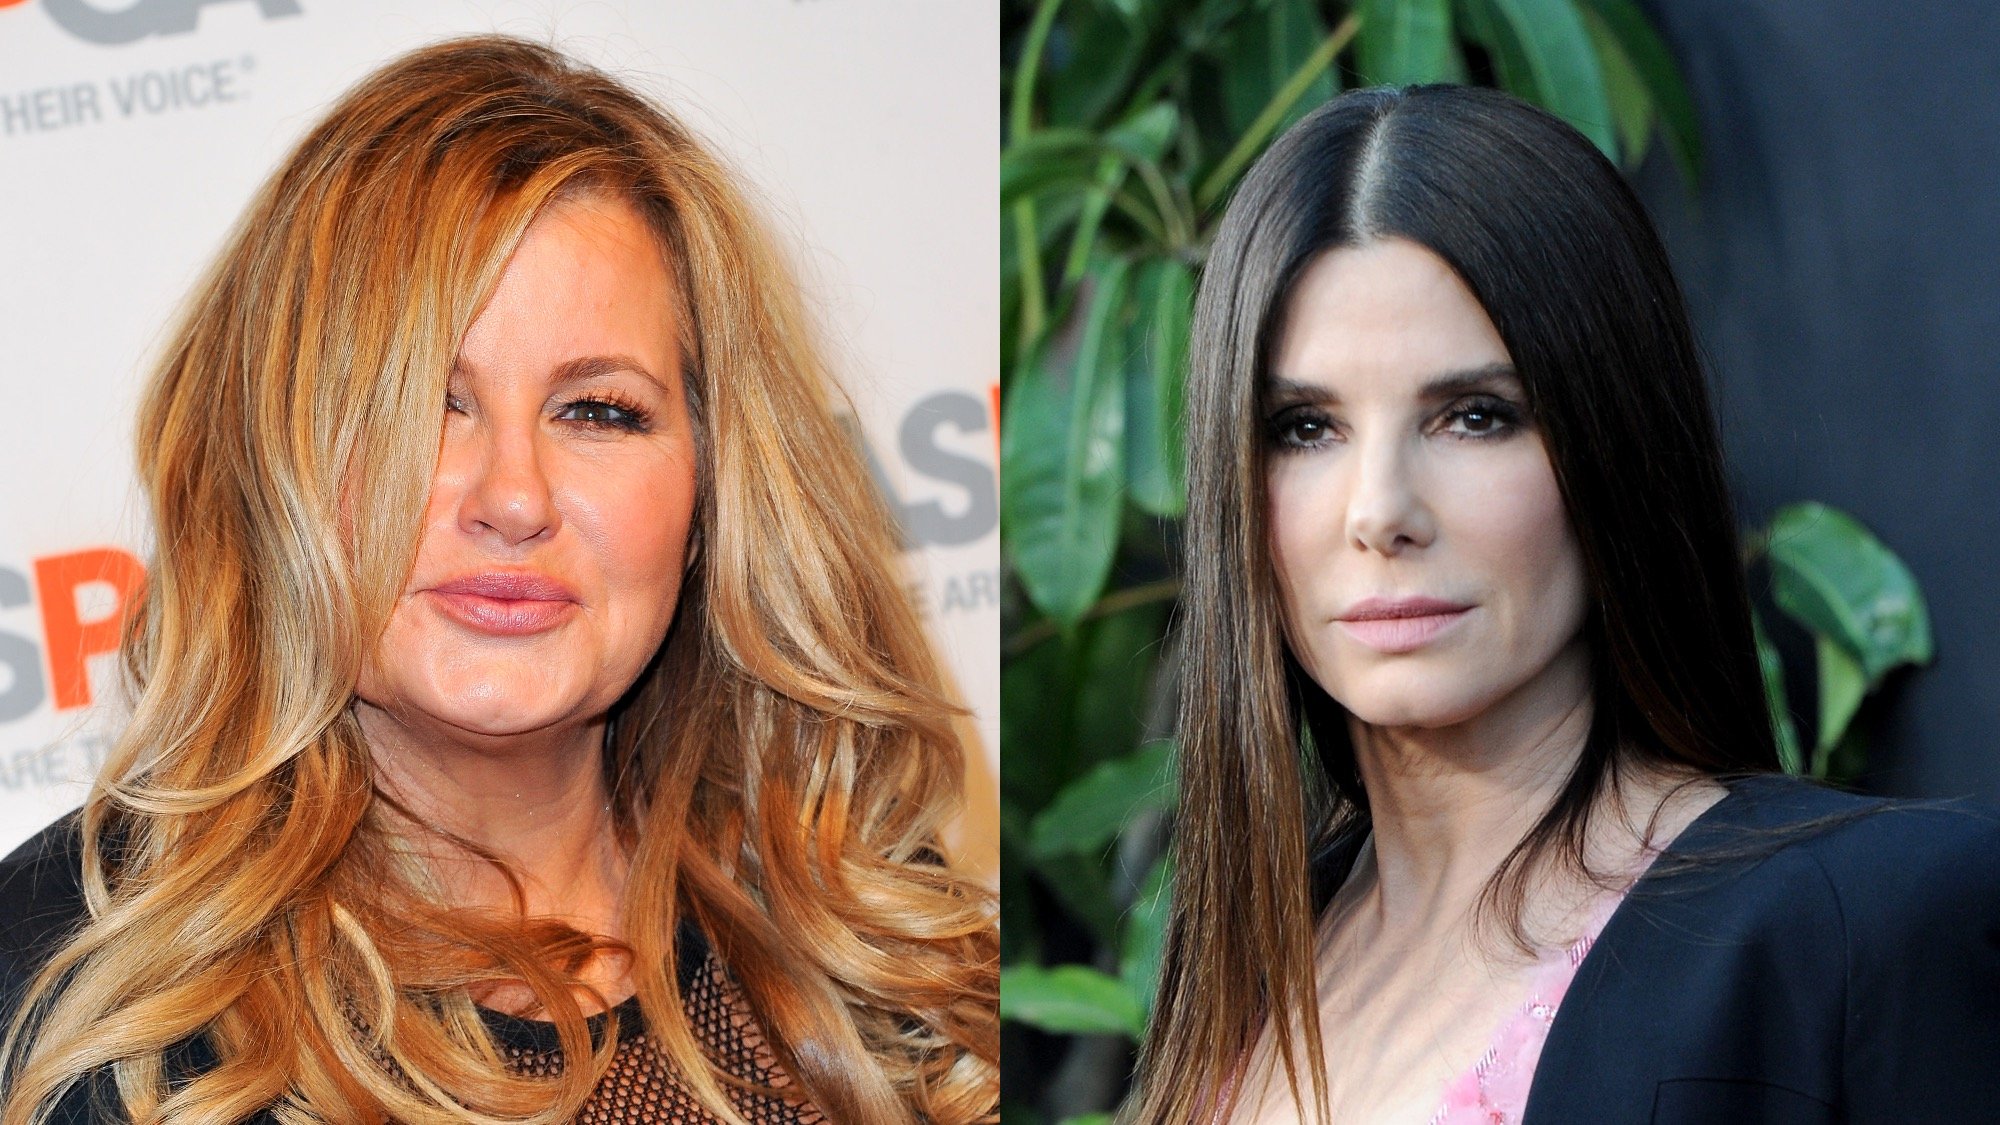 (L) Jennifer Coolidge attends ASPCA Benefit event at Private Residence on October 20, 2016, in Los Angeles, California. (R) Sandra Bullock attends the Los Angeles premiere of Paramount Pictures' "The Lost City" held on March 21, 2022, in Los Angeles, California.